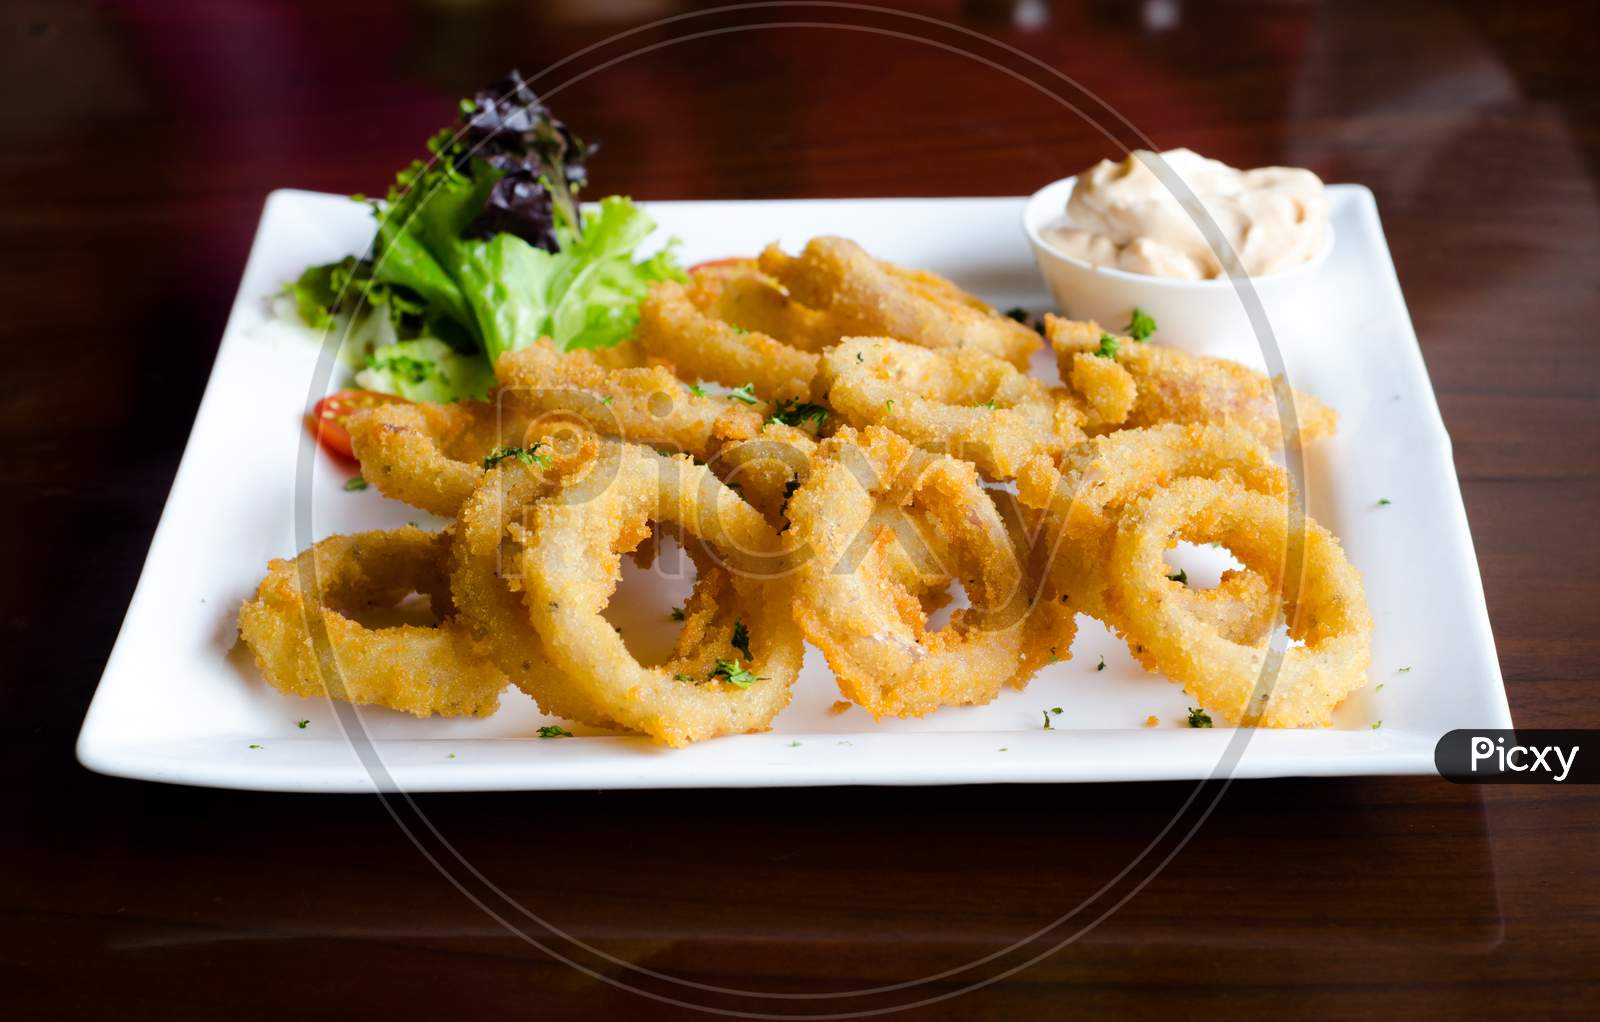 Tasty Onion Rings With Great Presentation